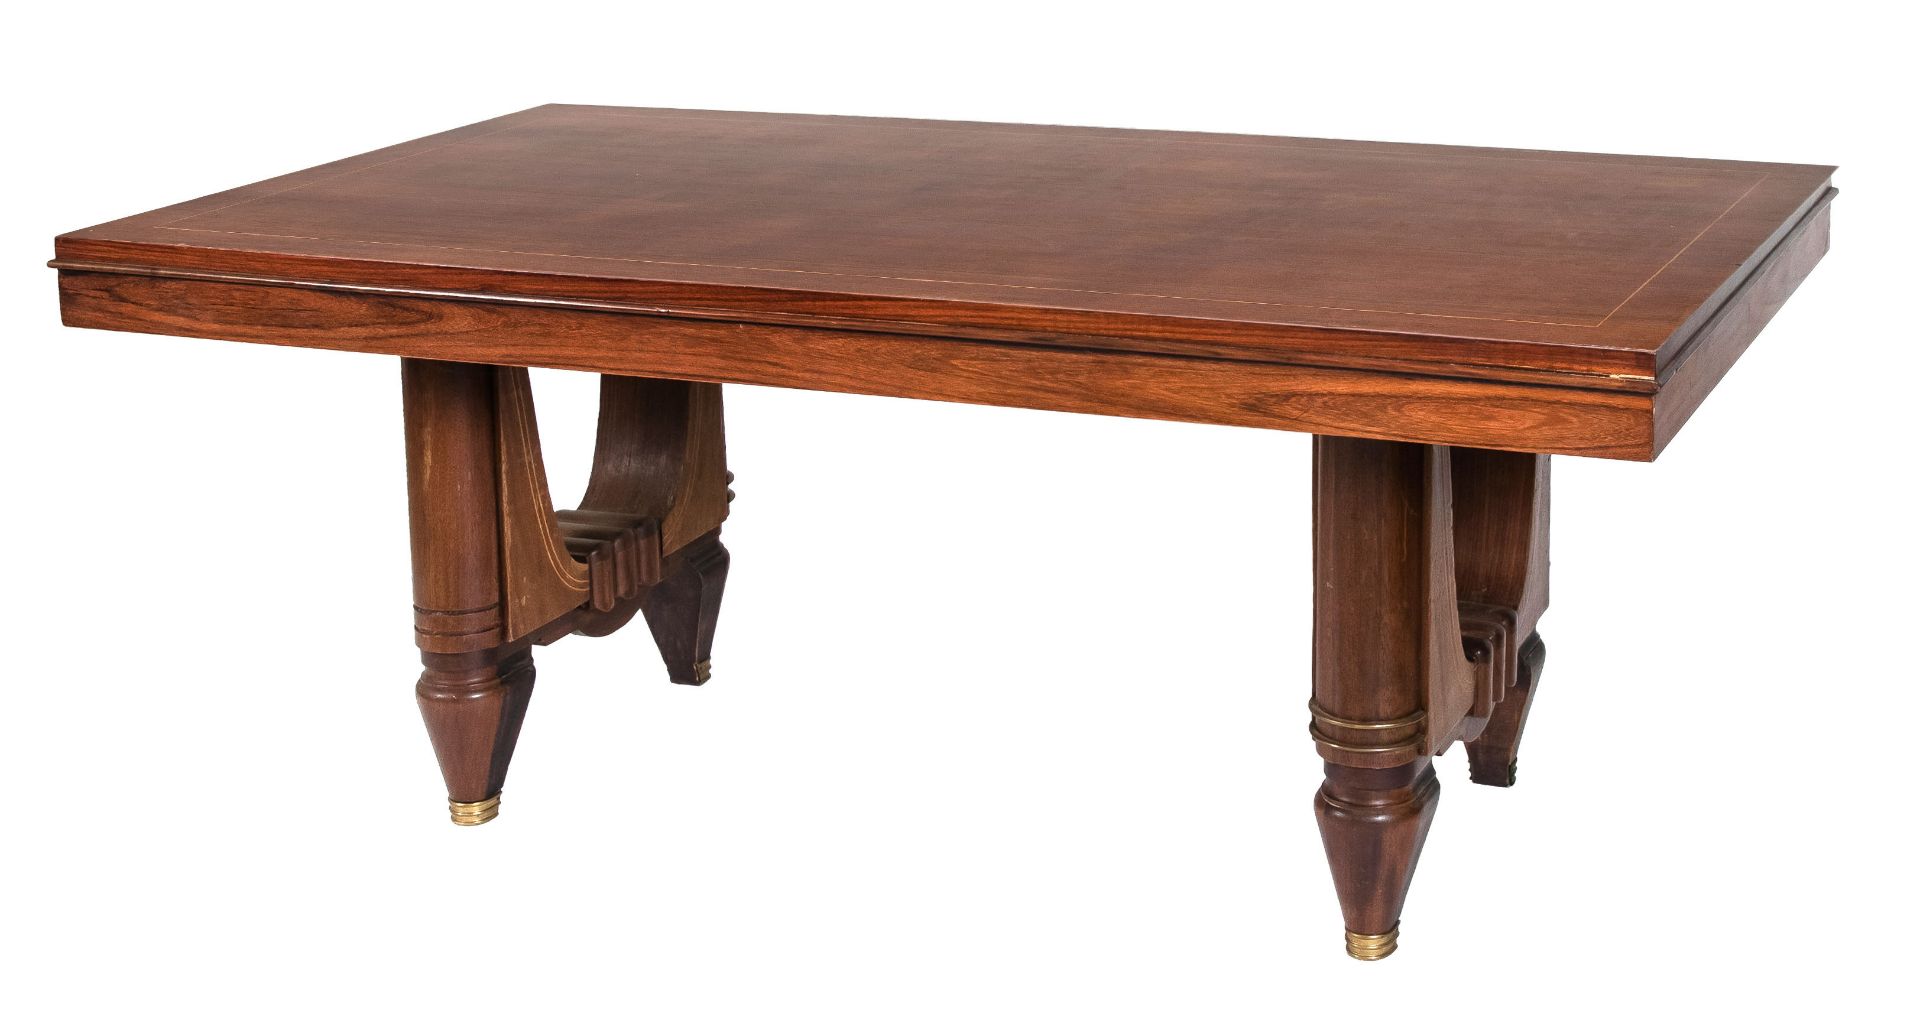 Table around 1900, rosewood with brass inlay, feet with brass, side pull-out drawers, 75 x 176 x